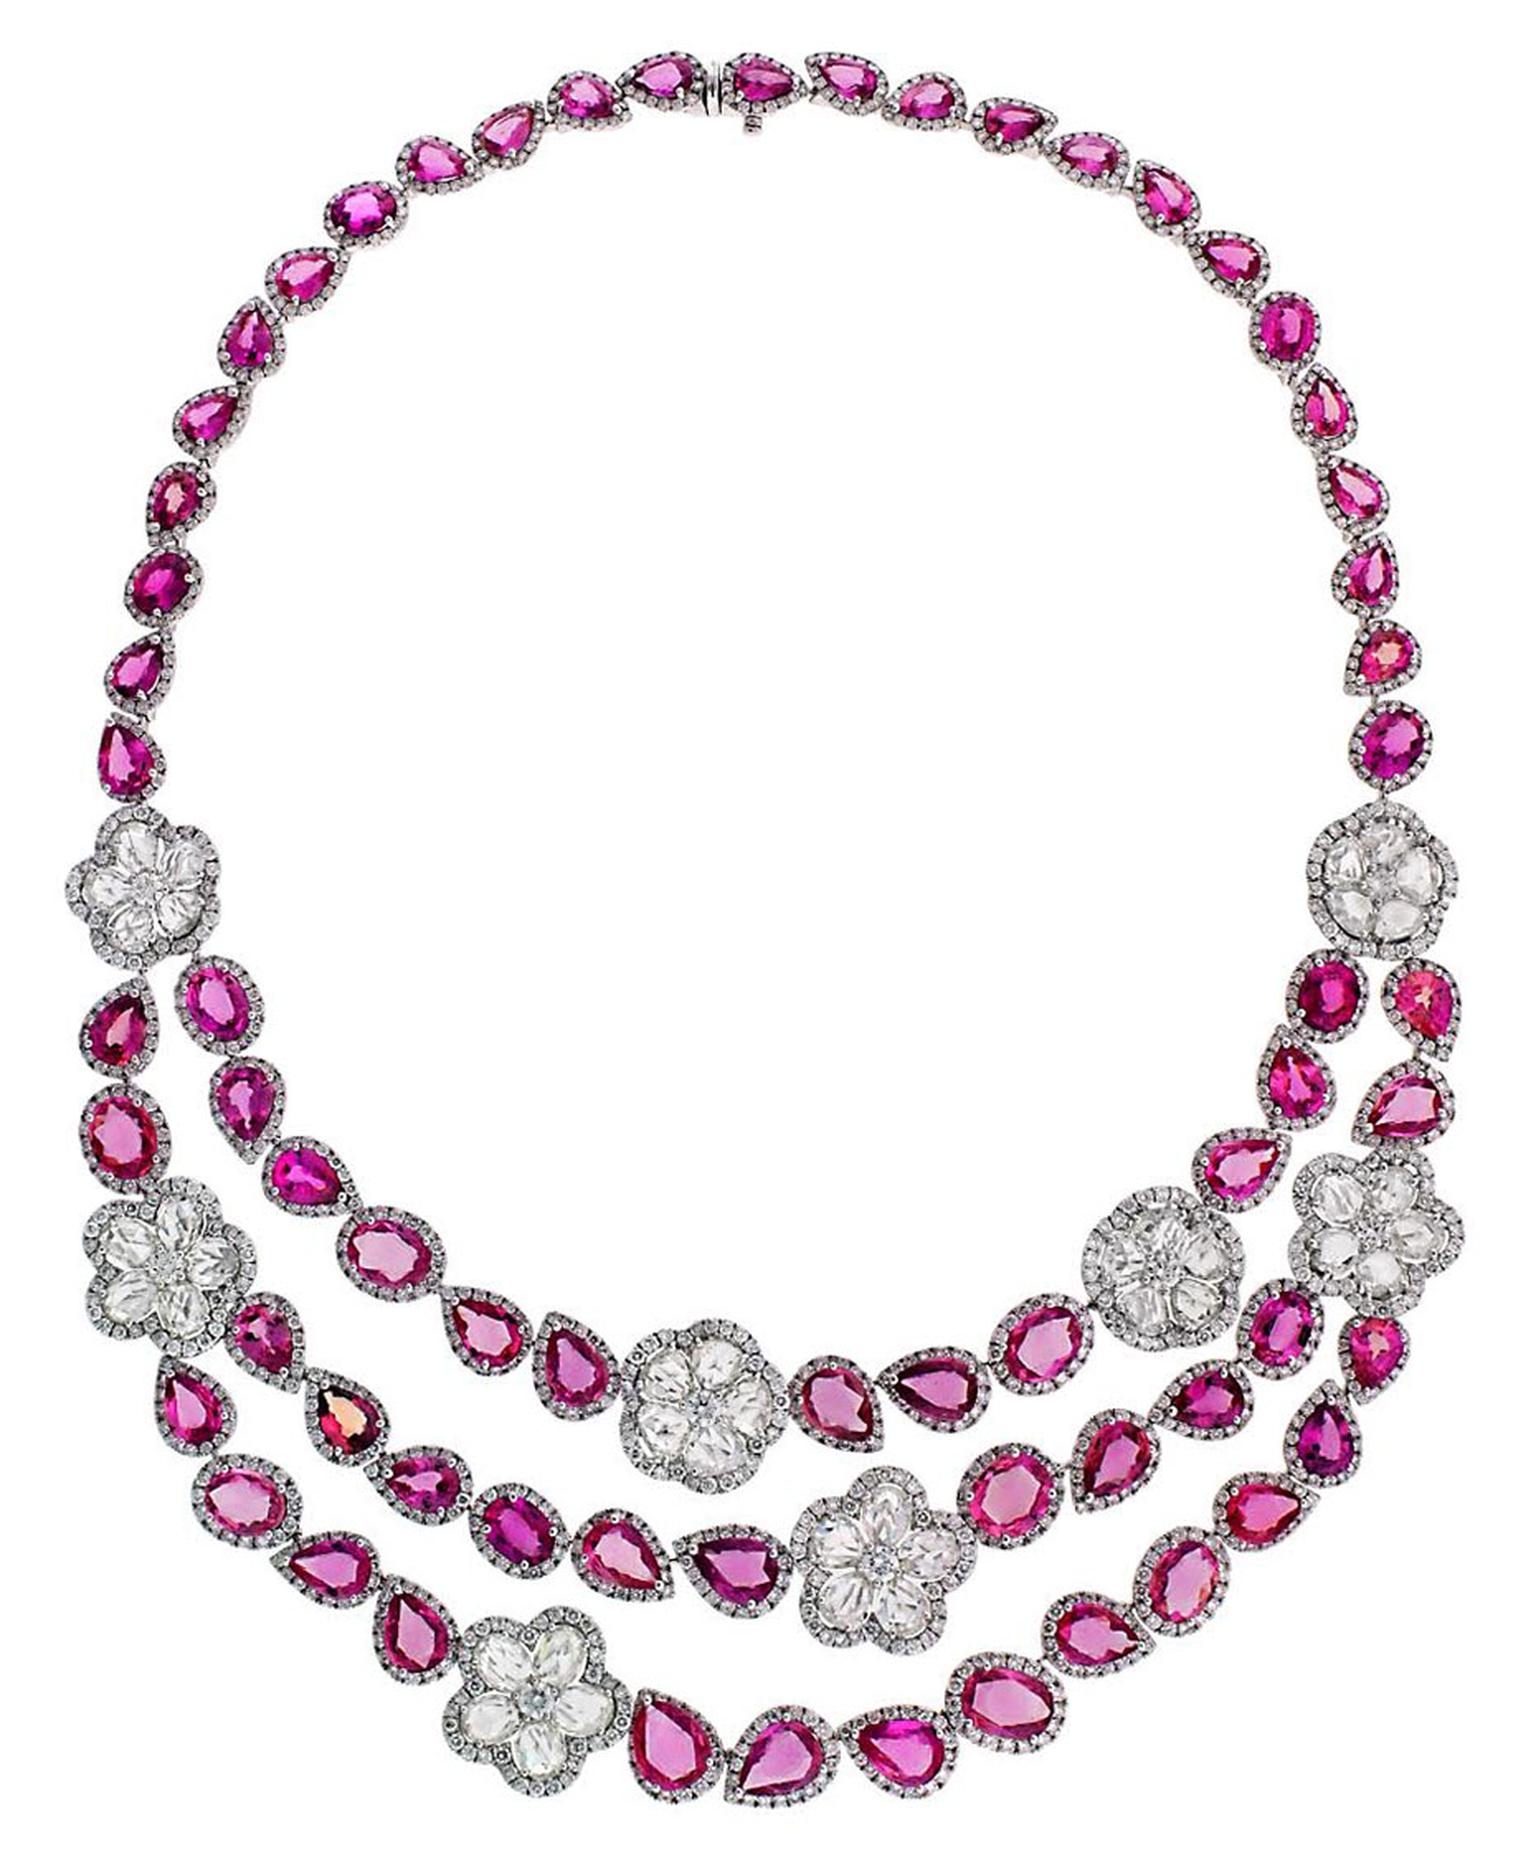 The Avakian pink sapphire and diamond necklace worn by Kelly Preston on day seven of the Cannes Film Festival 2014